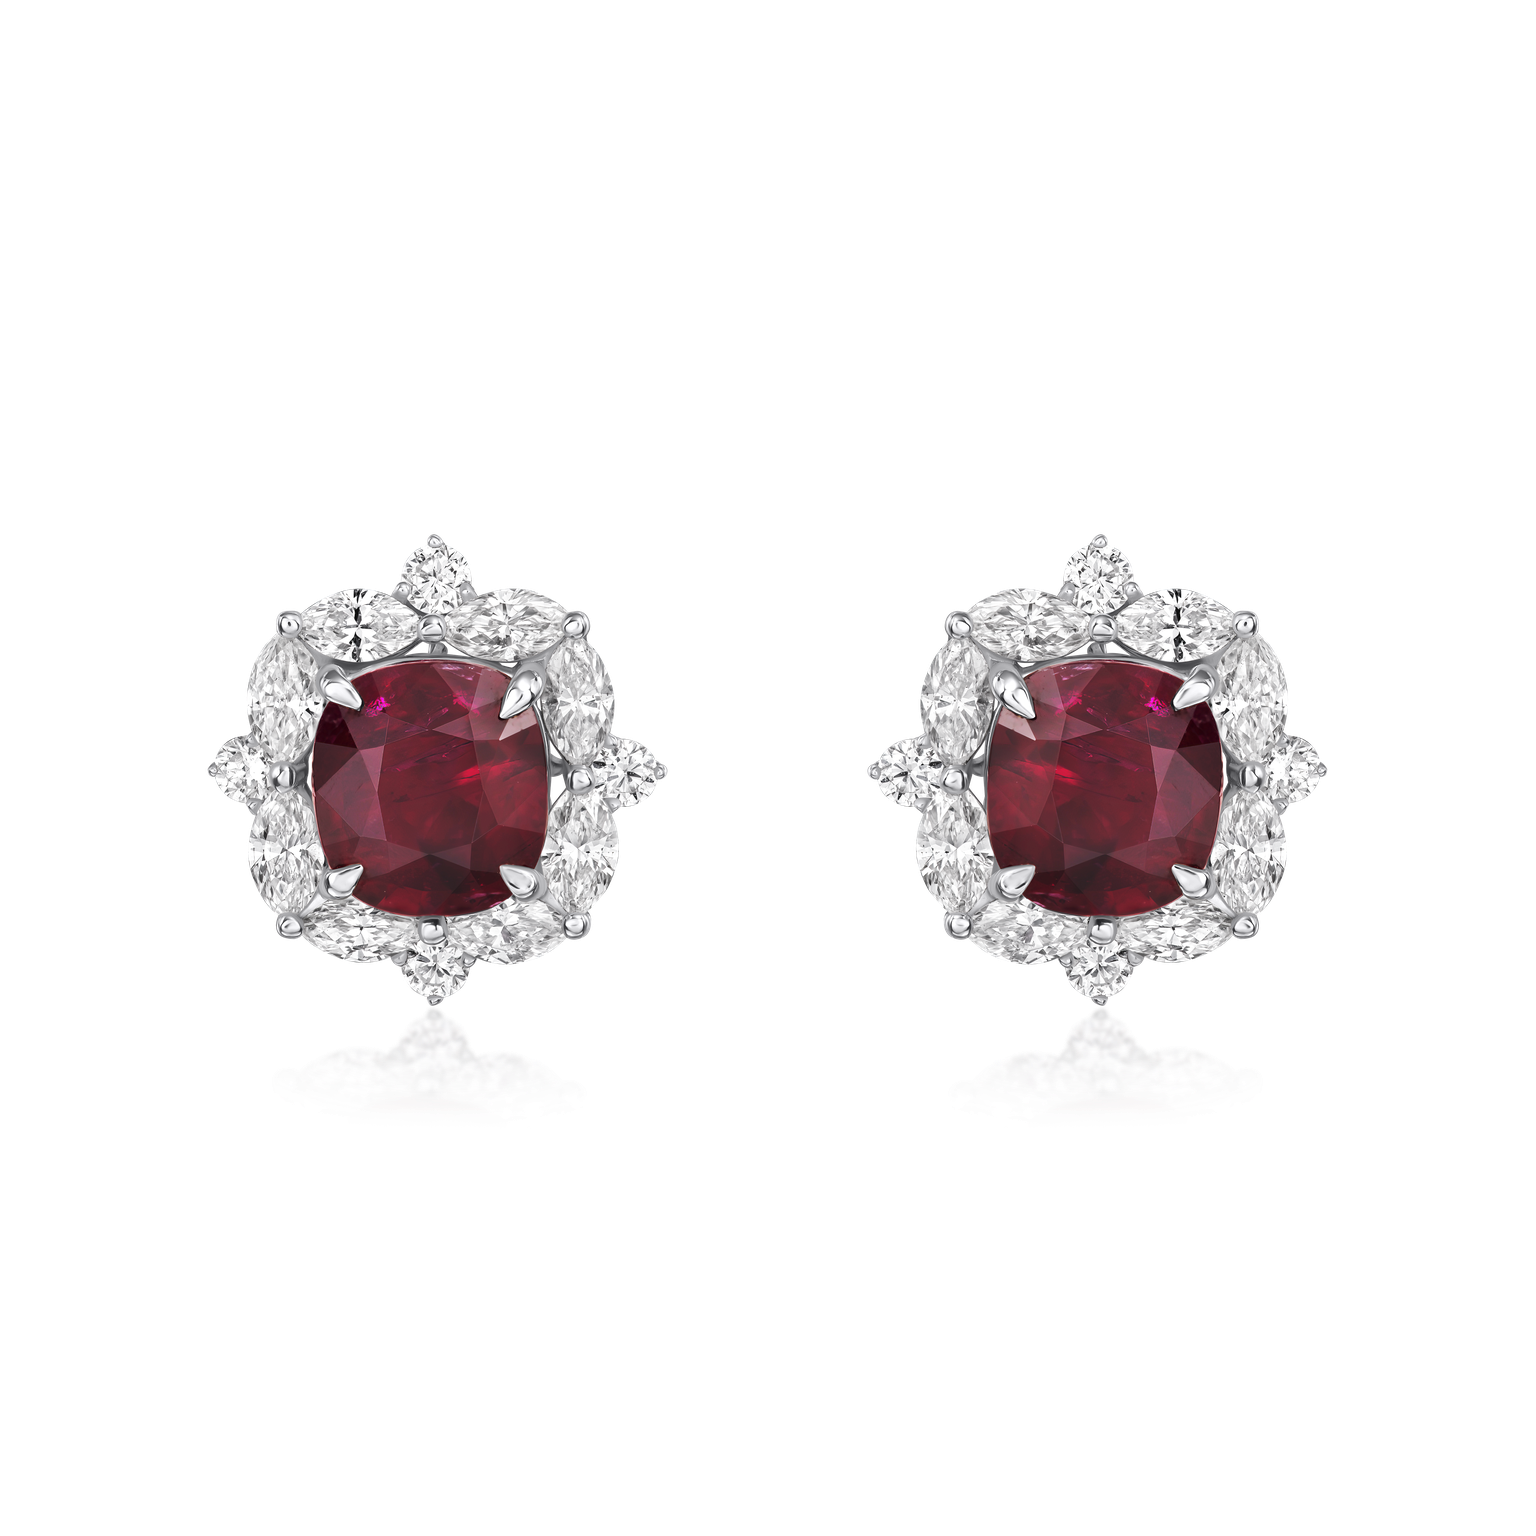 2.13cts Ruby and Diamond Cluster Earrings